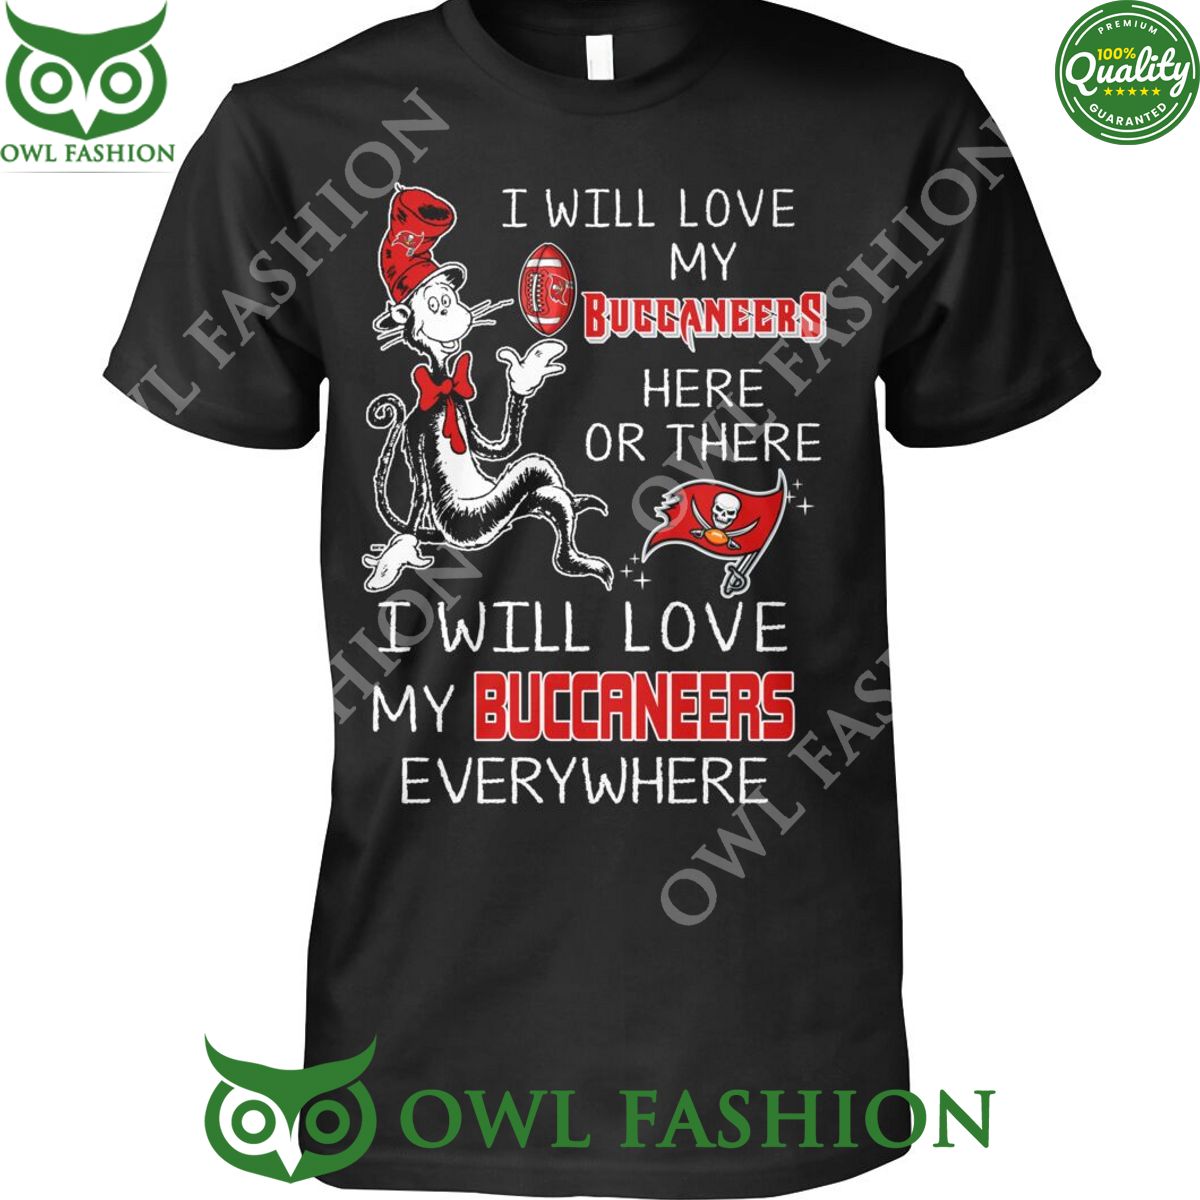 i will love my buccaneers here or there or everywhere tampa bay nfl team t shirt 1 h06mD.jpg